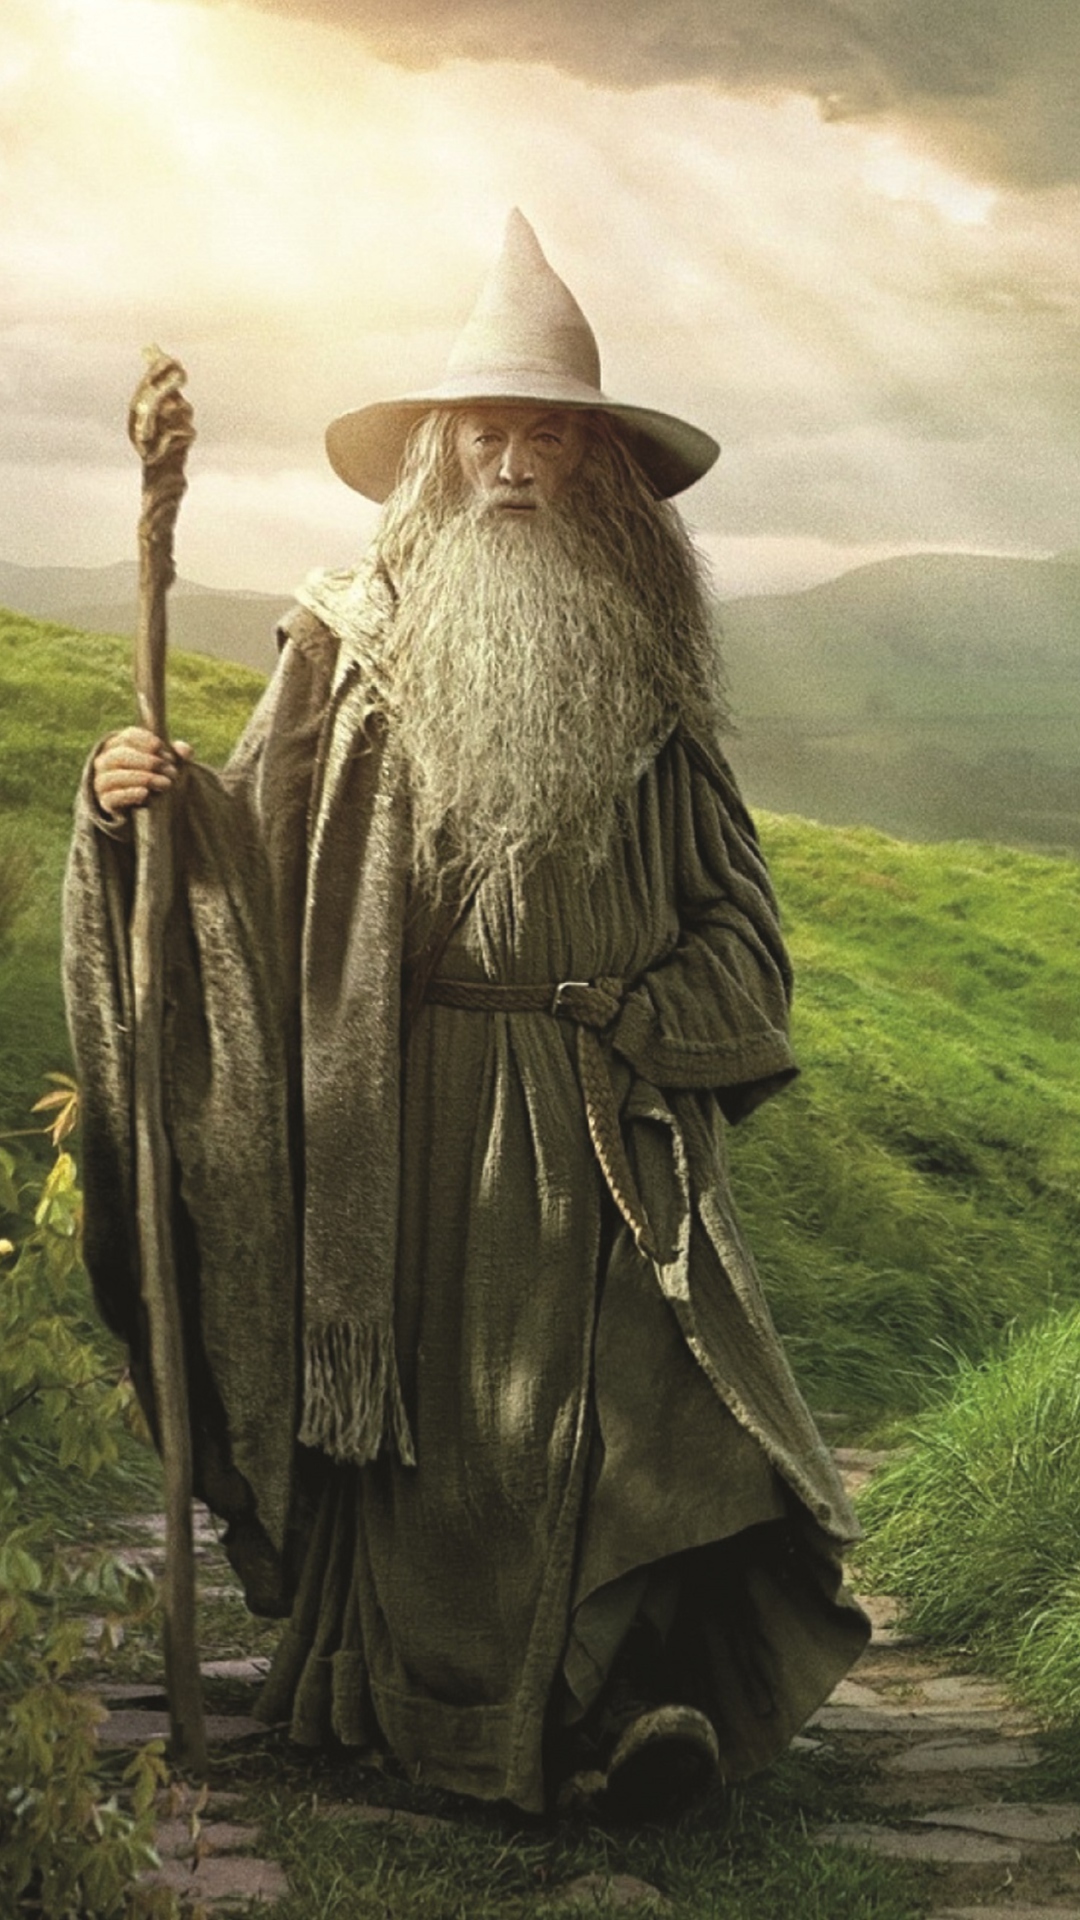 Lord Of The Rings Iphone Wallpaper Hd Wallpapermonkey Gandalf Mobile